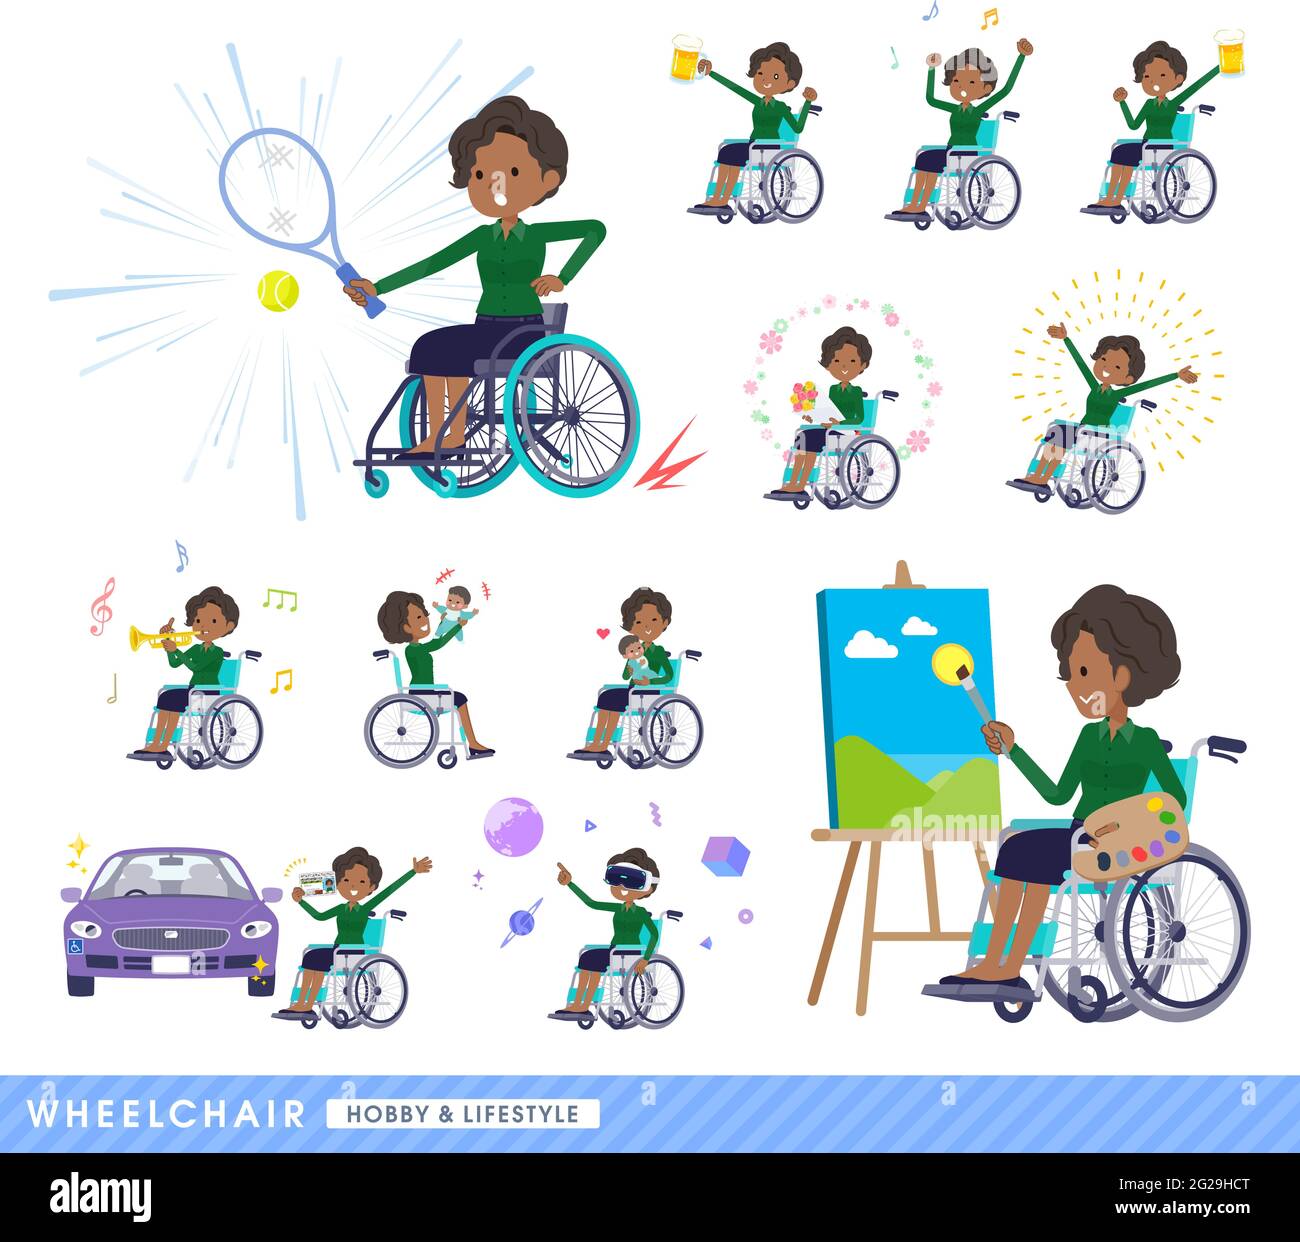 A set of Black business women in a wheelchair.About hobbies and lifestyle.It's vector art so easy to edit. Stock Vector